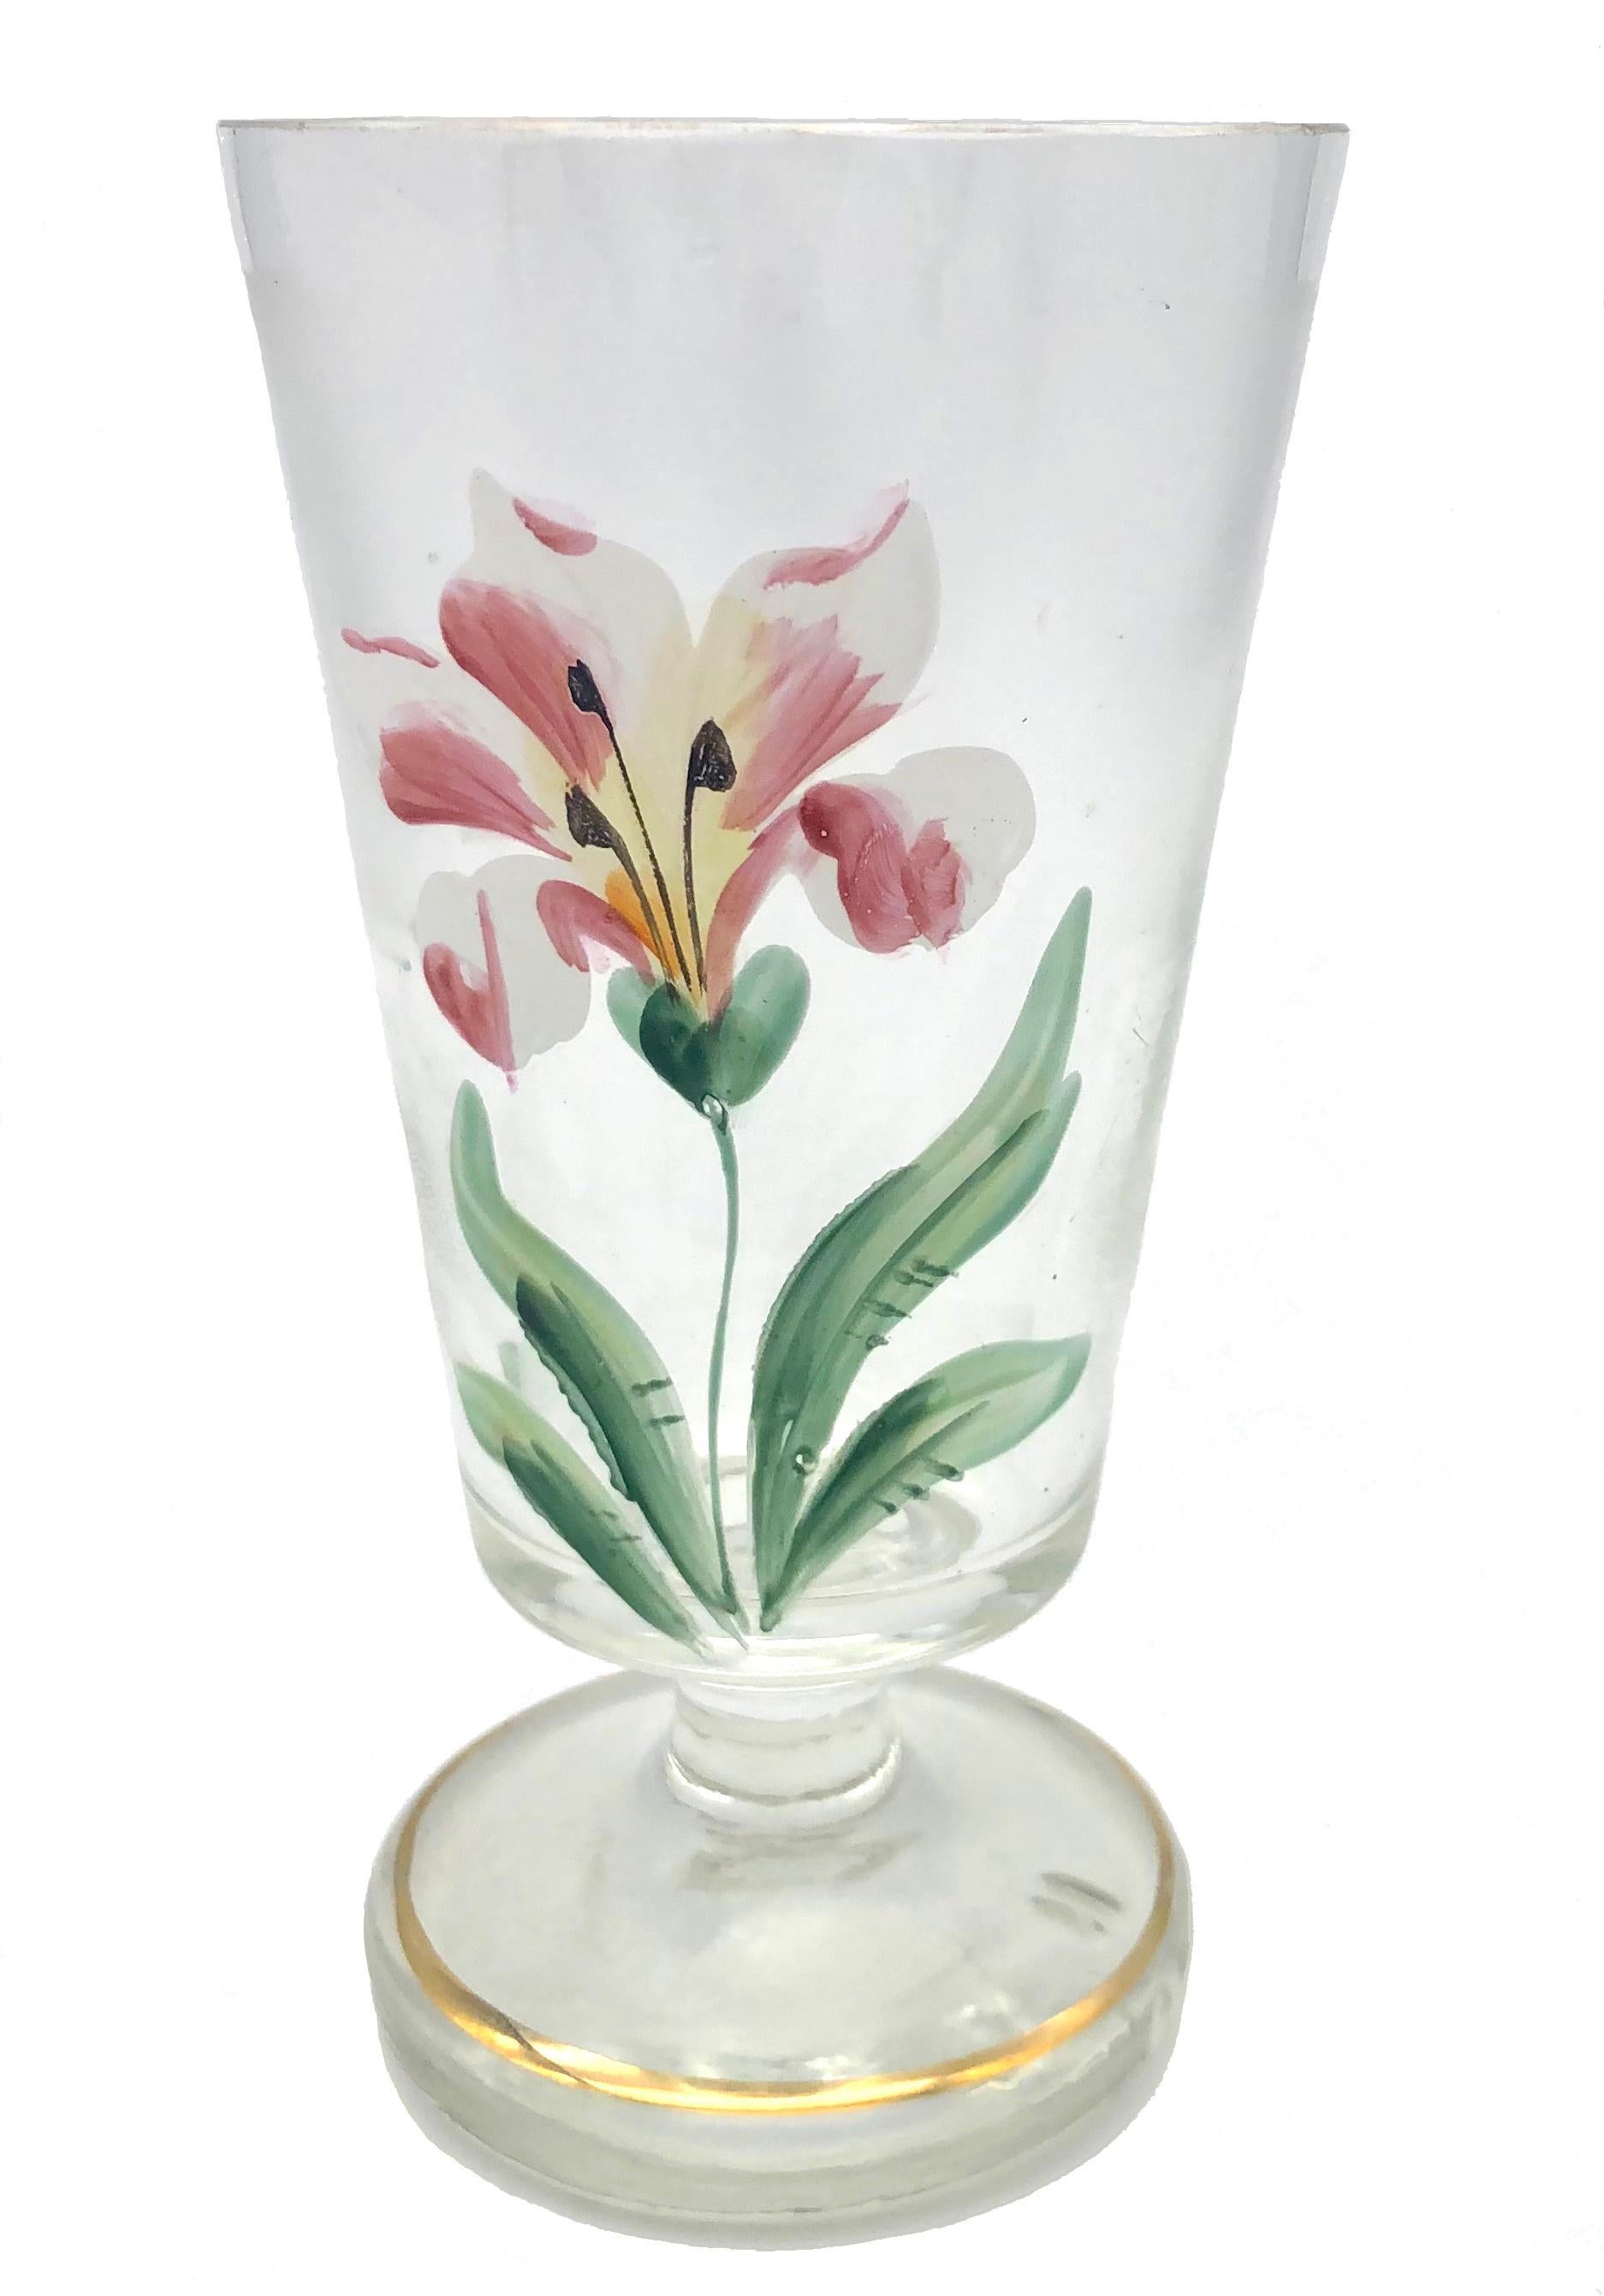 These four wine glases have been made in Bohemia in the last decade of the 19th century. 
They decoration is handpainted with lilies in full bloom on slightly irridescent clear glas, the foot of each glass is accentuated by a painted golden rim.